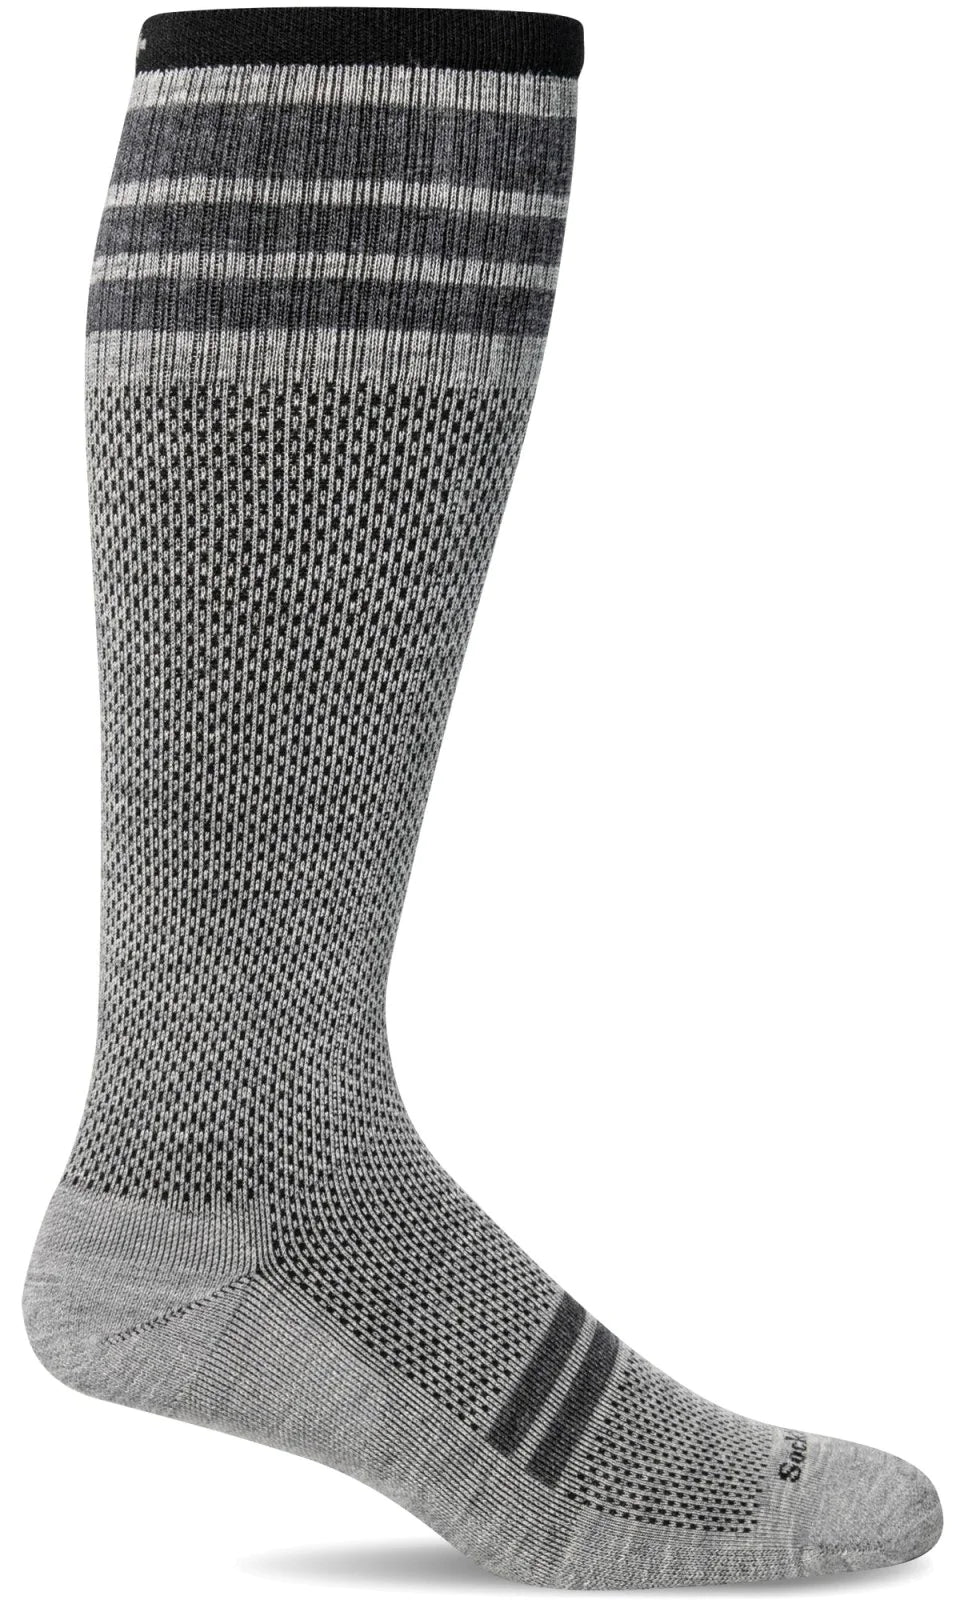 Men's Speedway Bamboo/Merino Firm Compression Sock in Grey - The Sockery